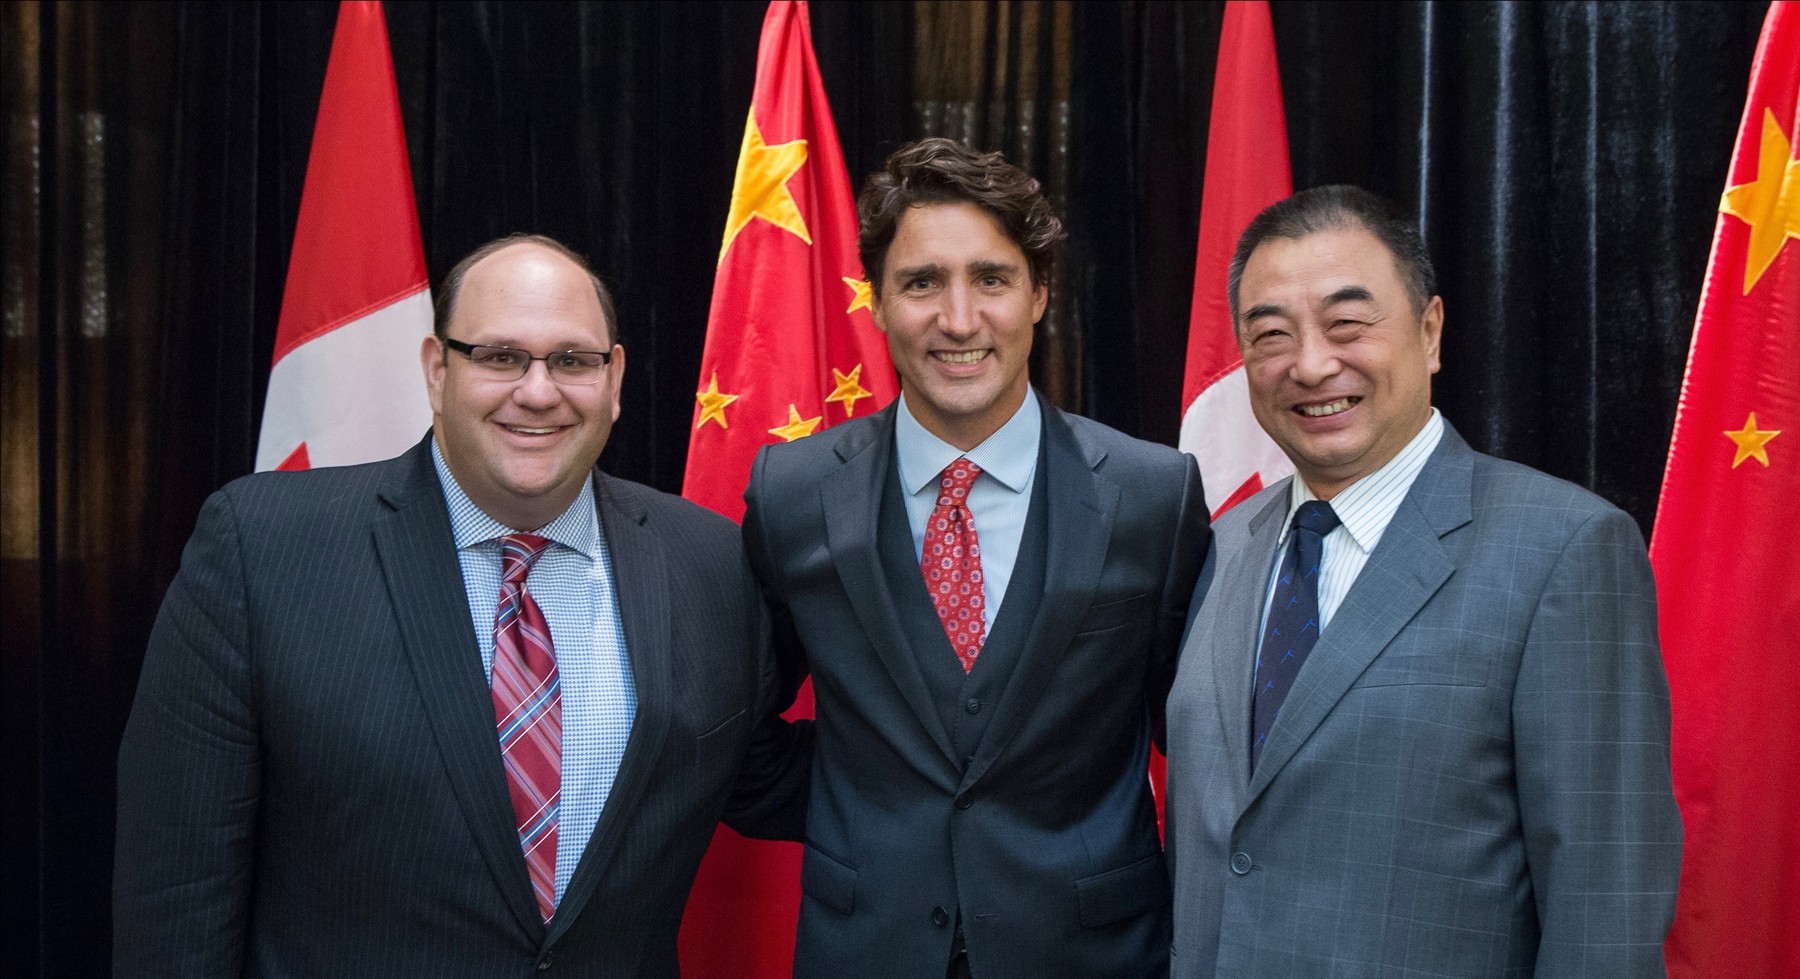 Left-to-right-Michael-Rubinoff-Associate-Dean-at-Sheridan-College-Prime-Minister-Justin-Trudeau-Yang-Shaolin-General-Manager-of-the-Shanghai-Dramatic-Arts-Centre | Government of Canada